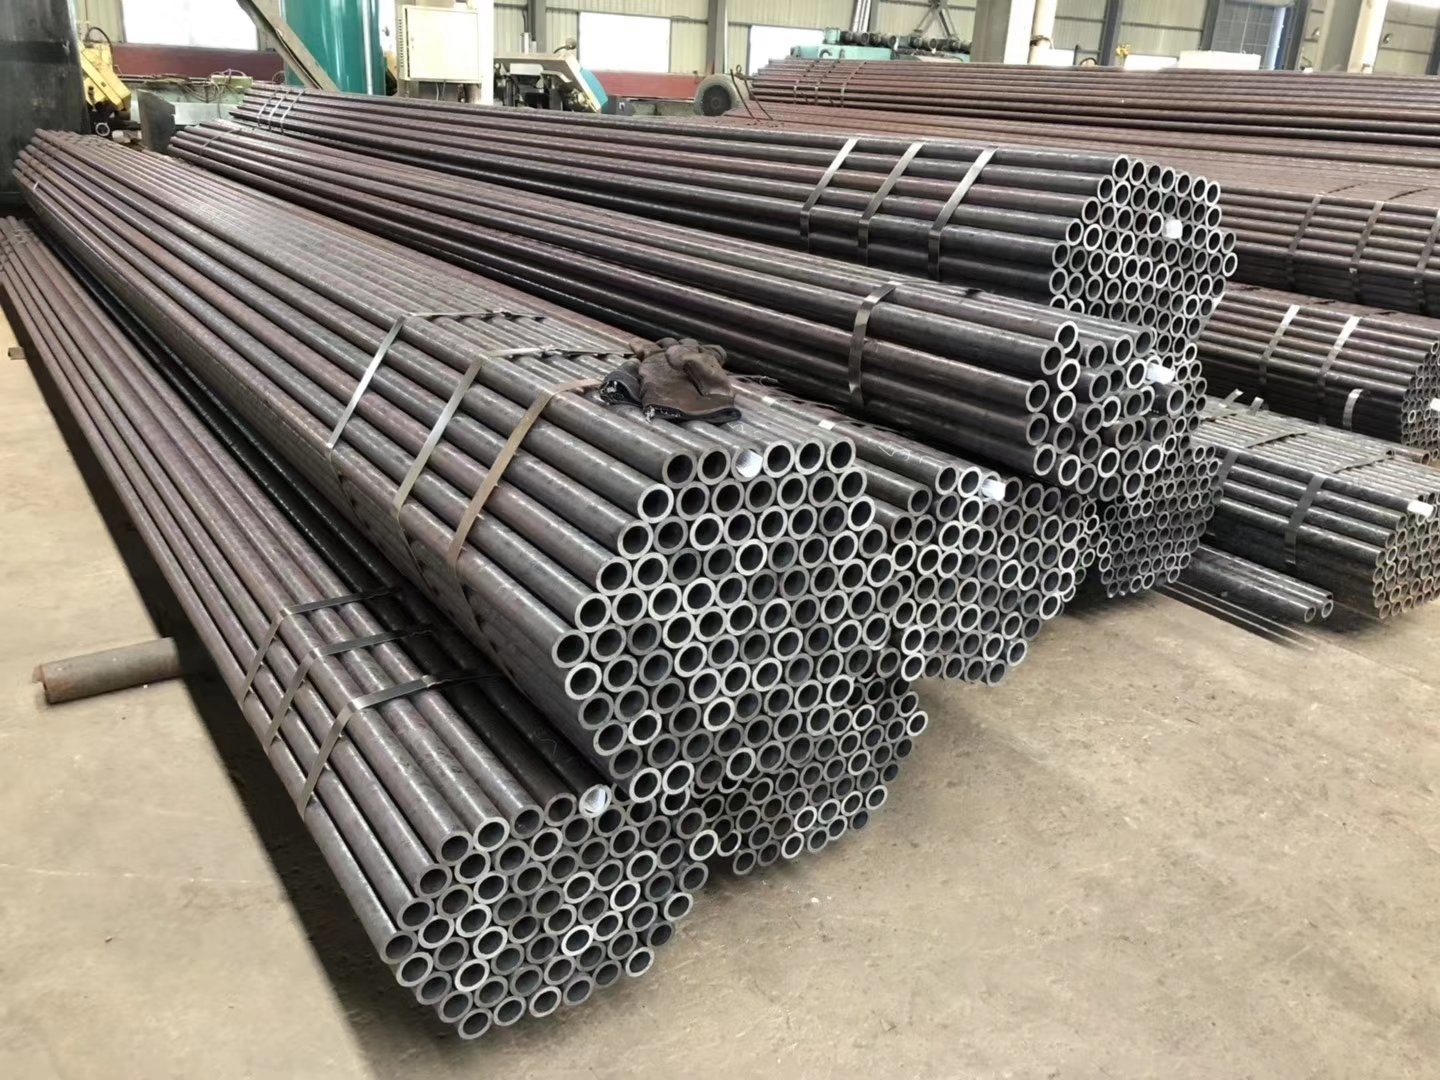 High-Quality-Best-Price-Seamless-Steel-Tube-Seamless-Tube-API-5L-Seamless-Steel-Pipe-.jpg